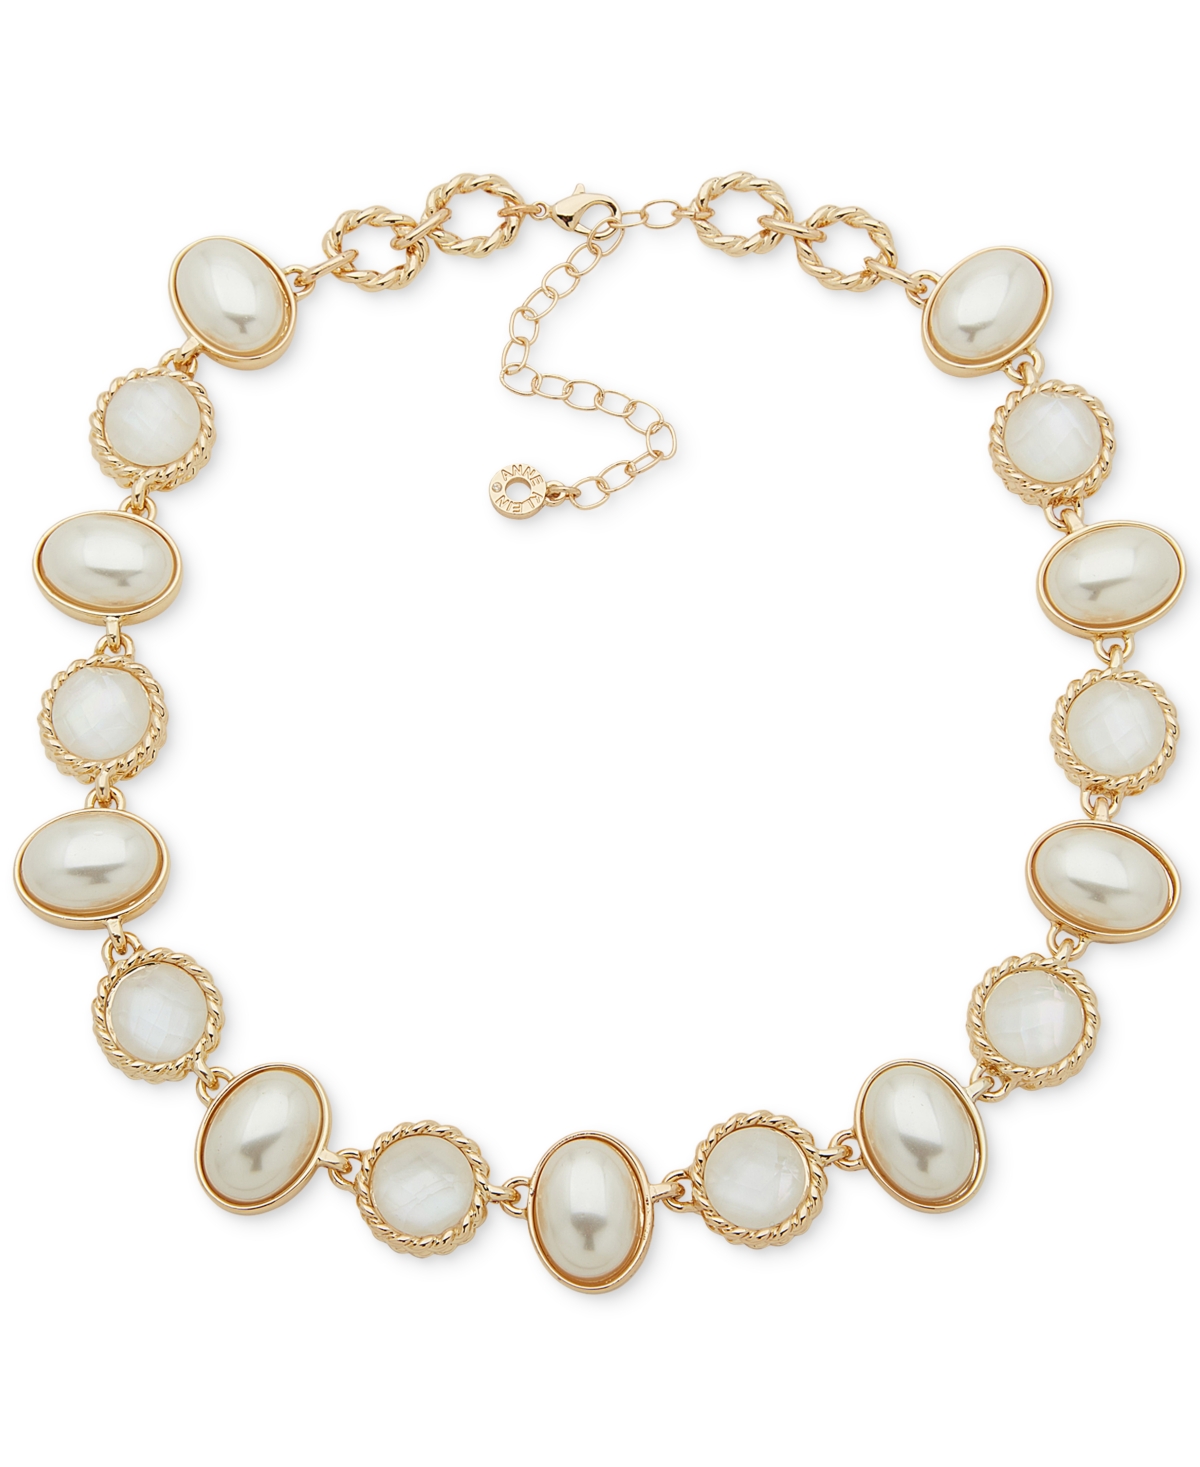 Anne Klein Gold-tone White Stone & Mother-of-pearl Collar Necklace, 16" + 3" Extender In Neutral